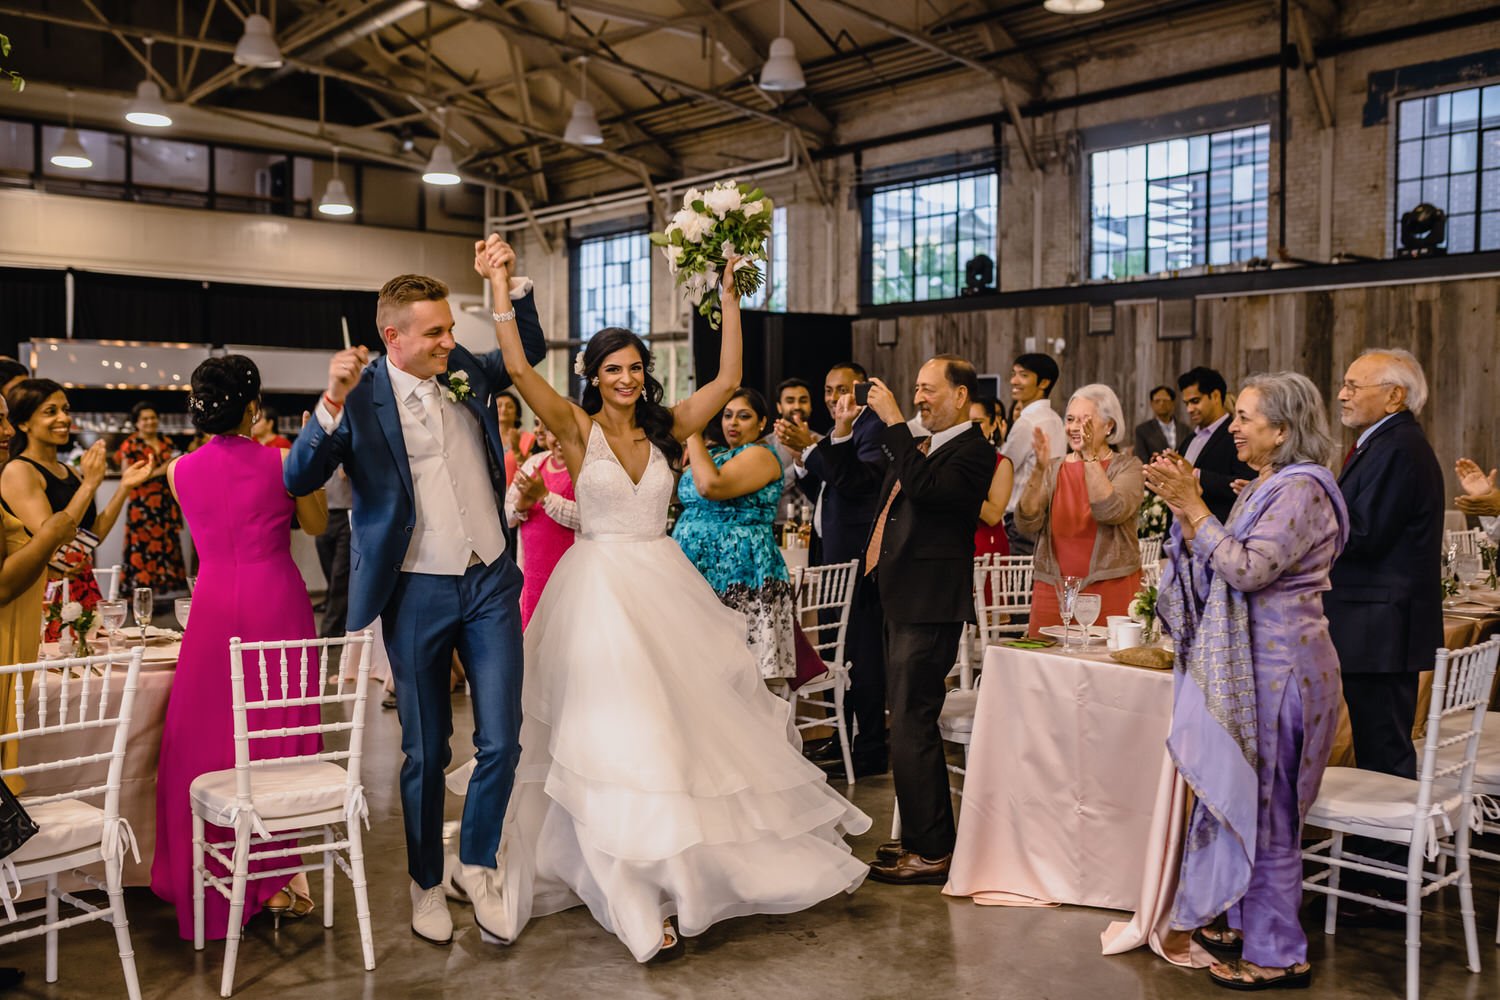 grand entrance of the bride and groom at a horticulture building wedding